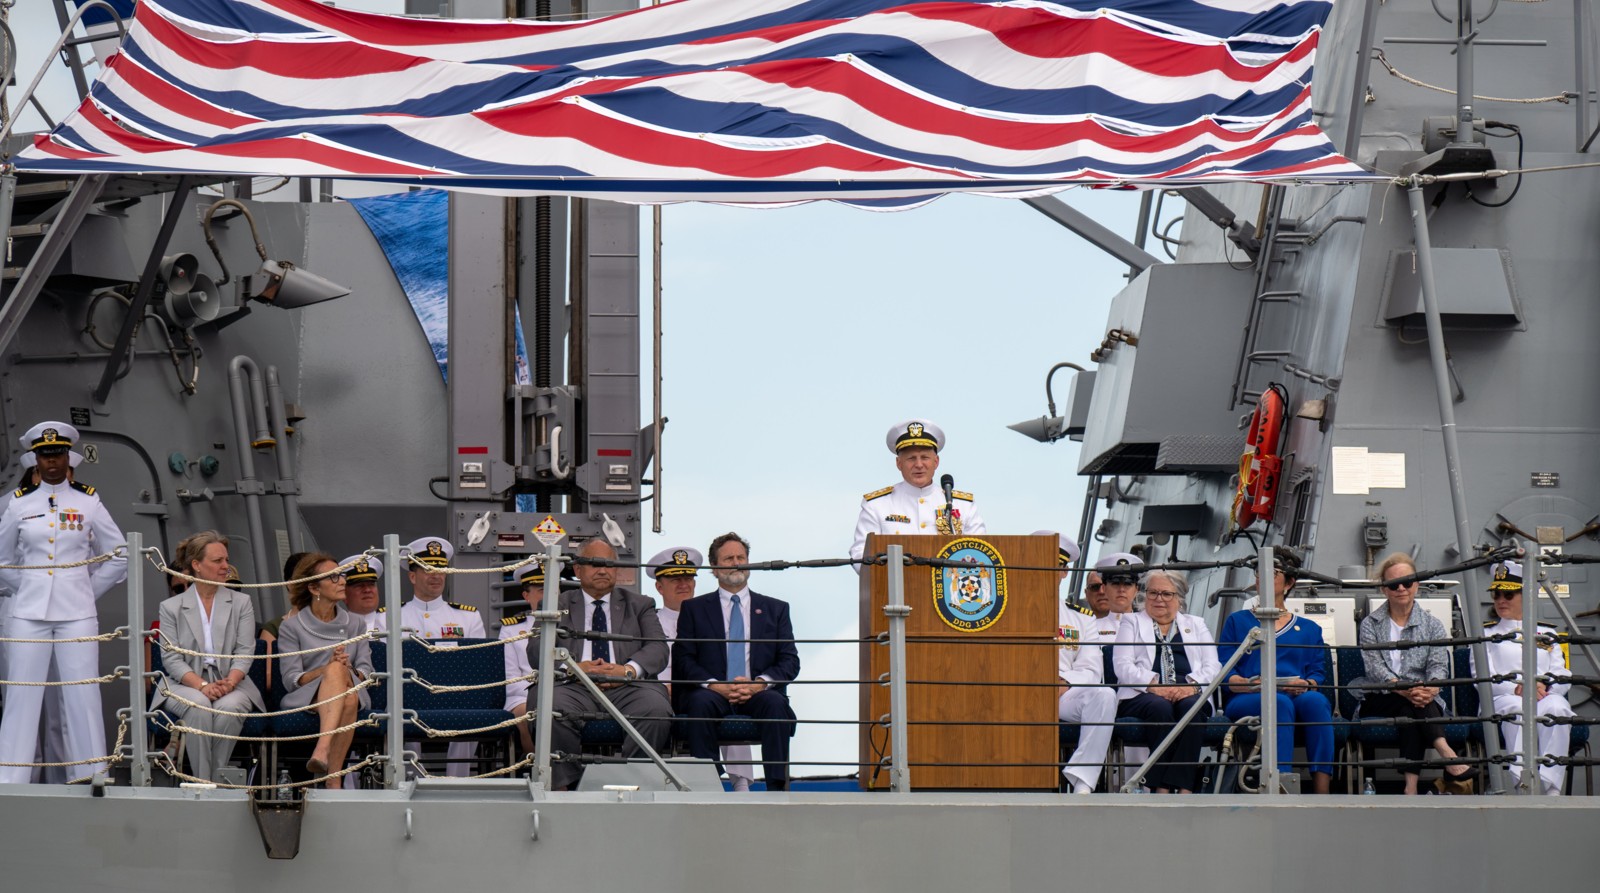 ddg-123 uss lenah h. sutcliffe higbee arleigh burke class guided missile destroyer aegis us navy commissioning ceremony key west 22